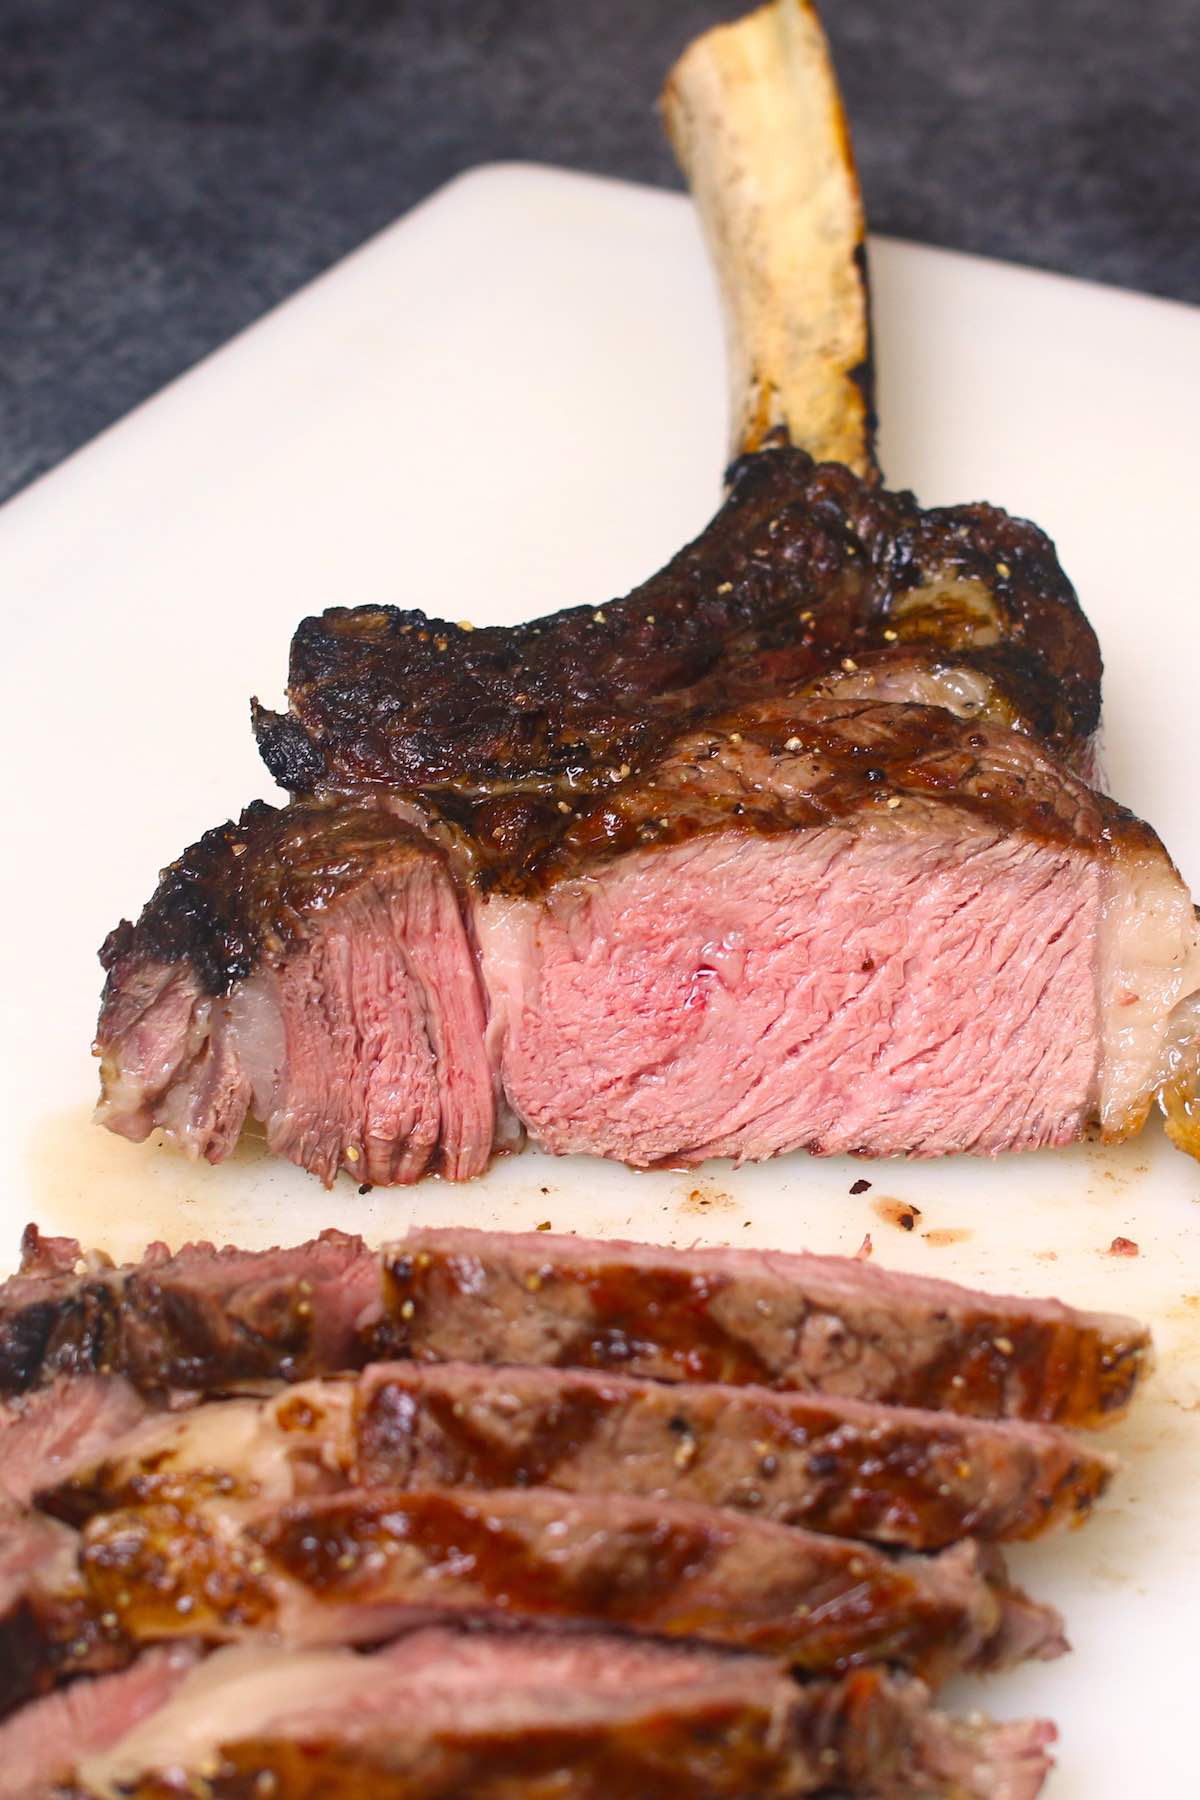 Tomahawk steak cooked medium and cut crosswise against the grain showing a warm pink color